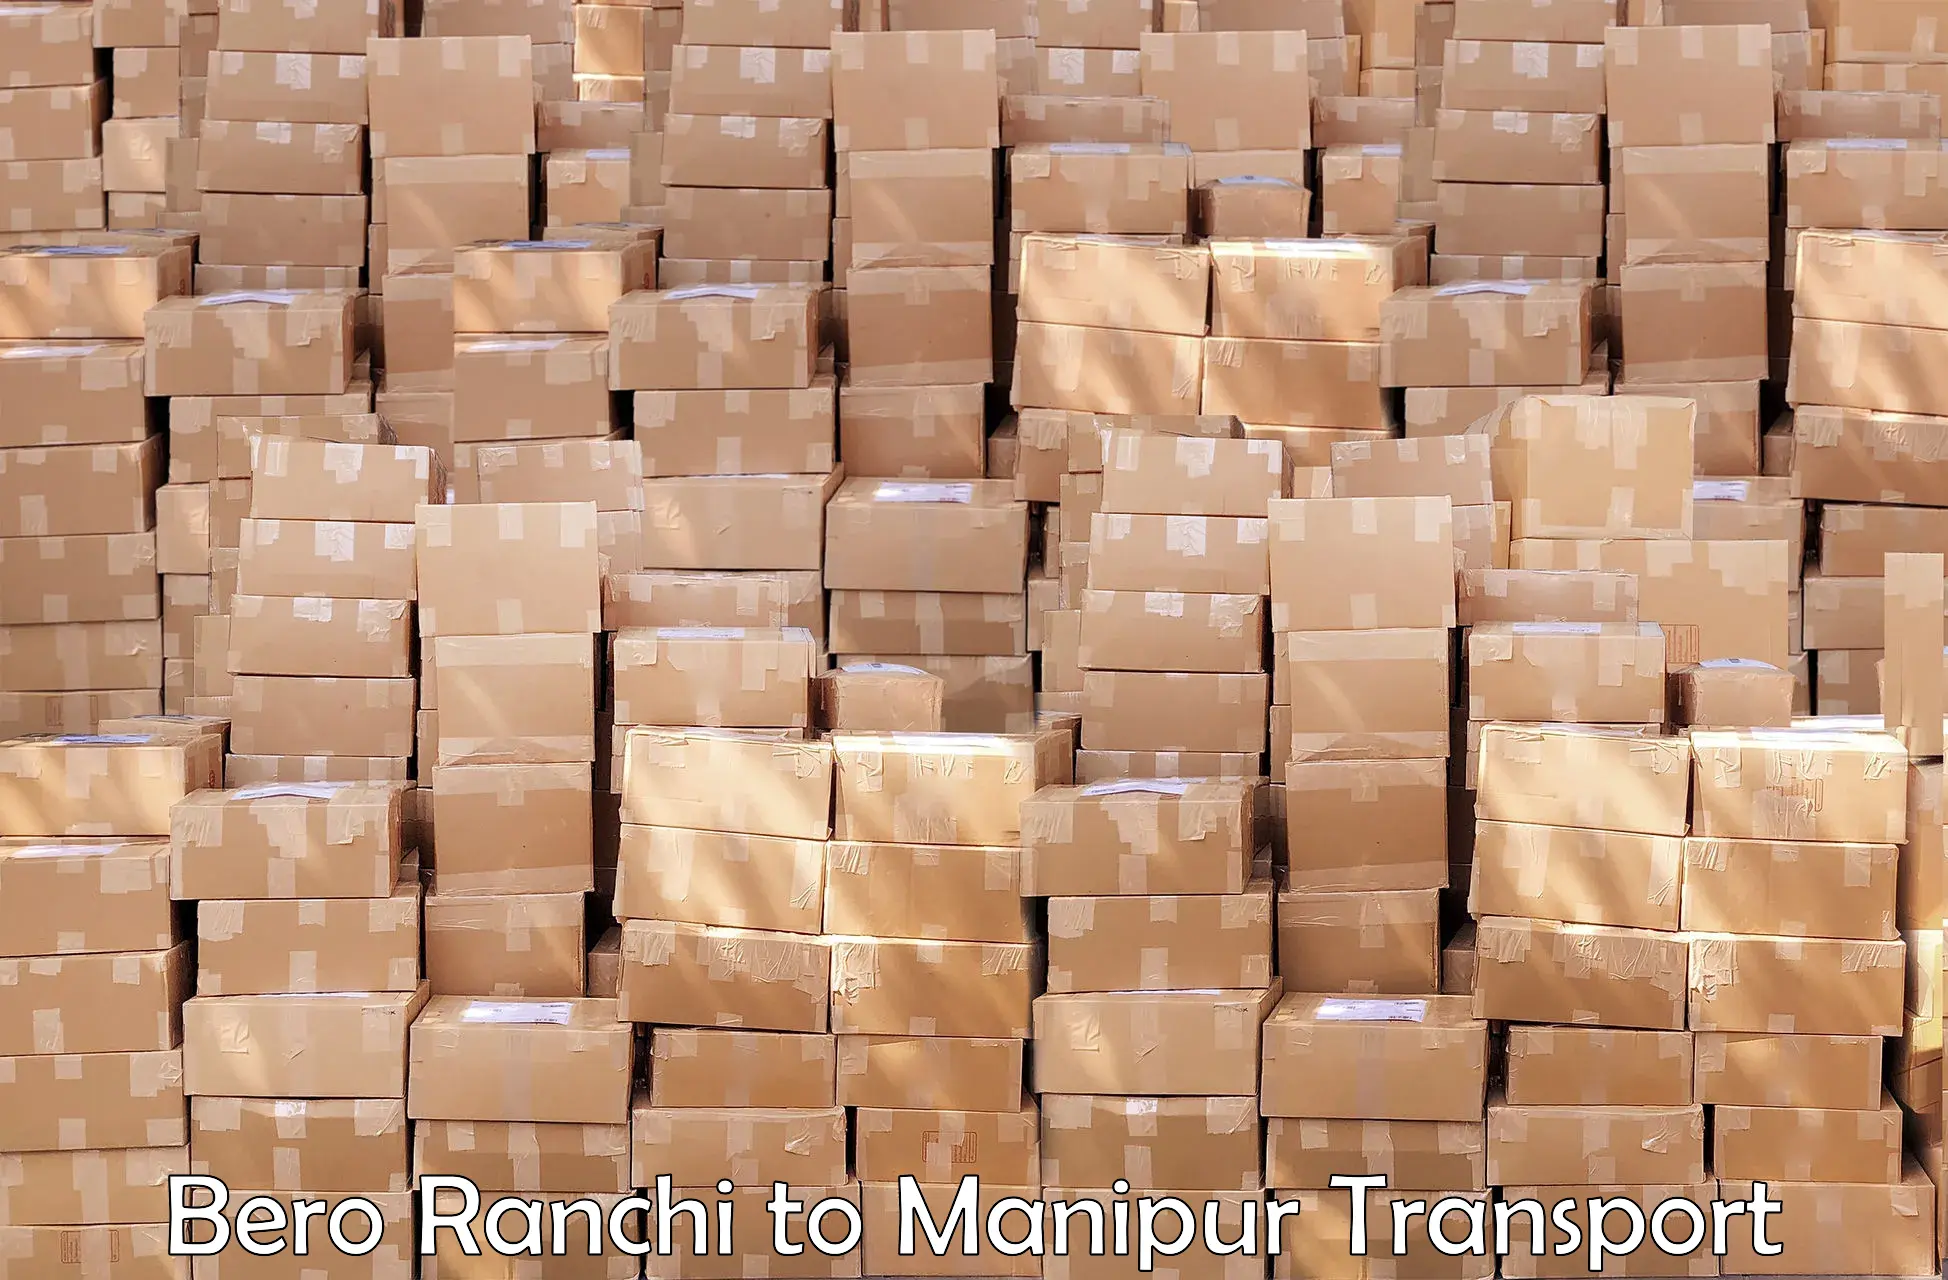 Air freight transport services in Bero Ranchi to Moirang